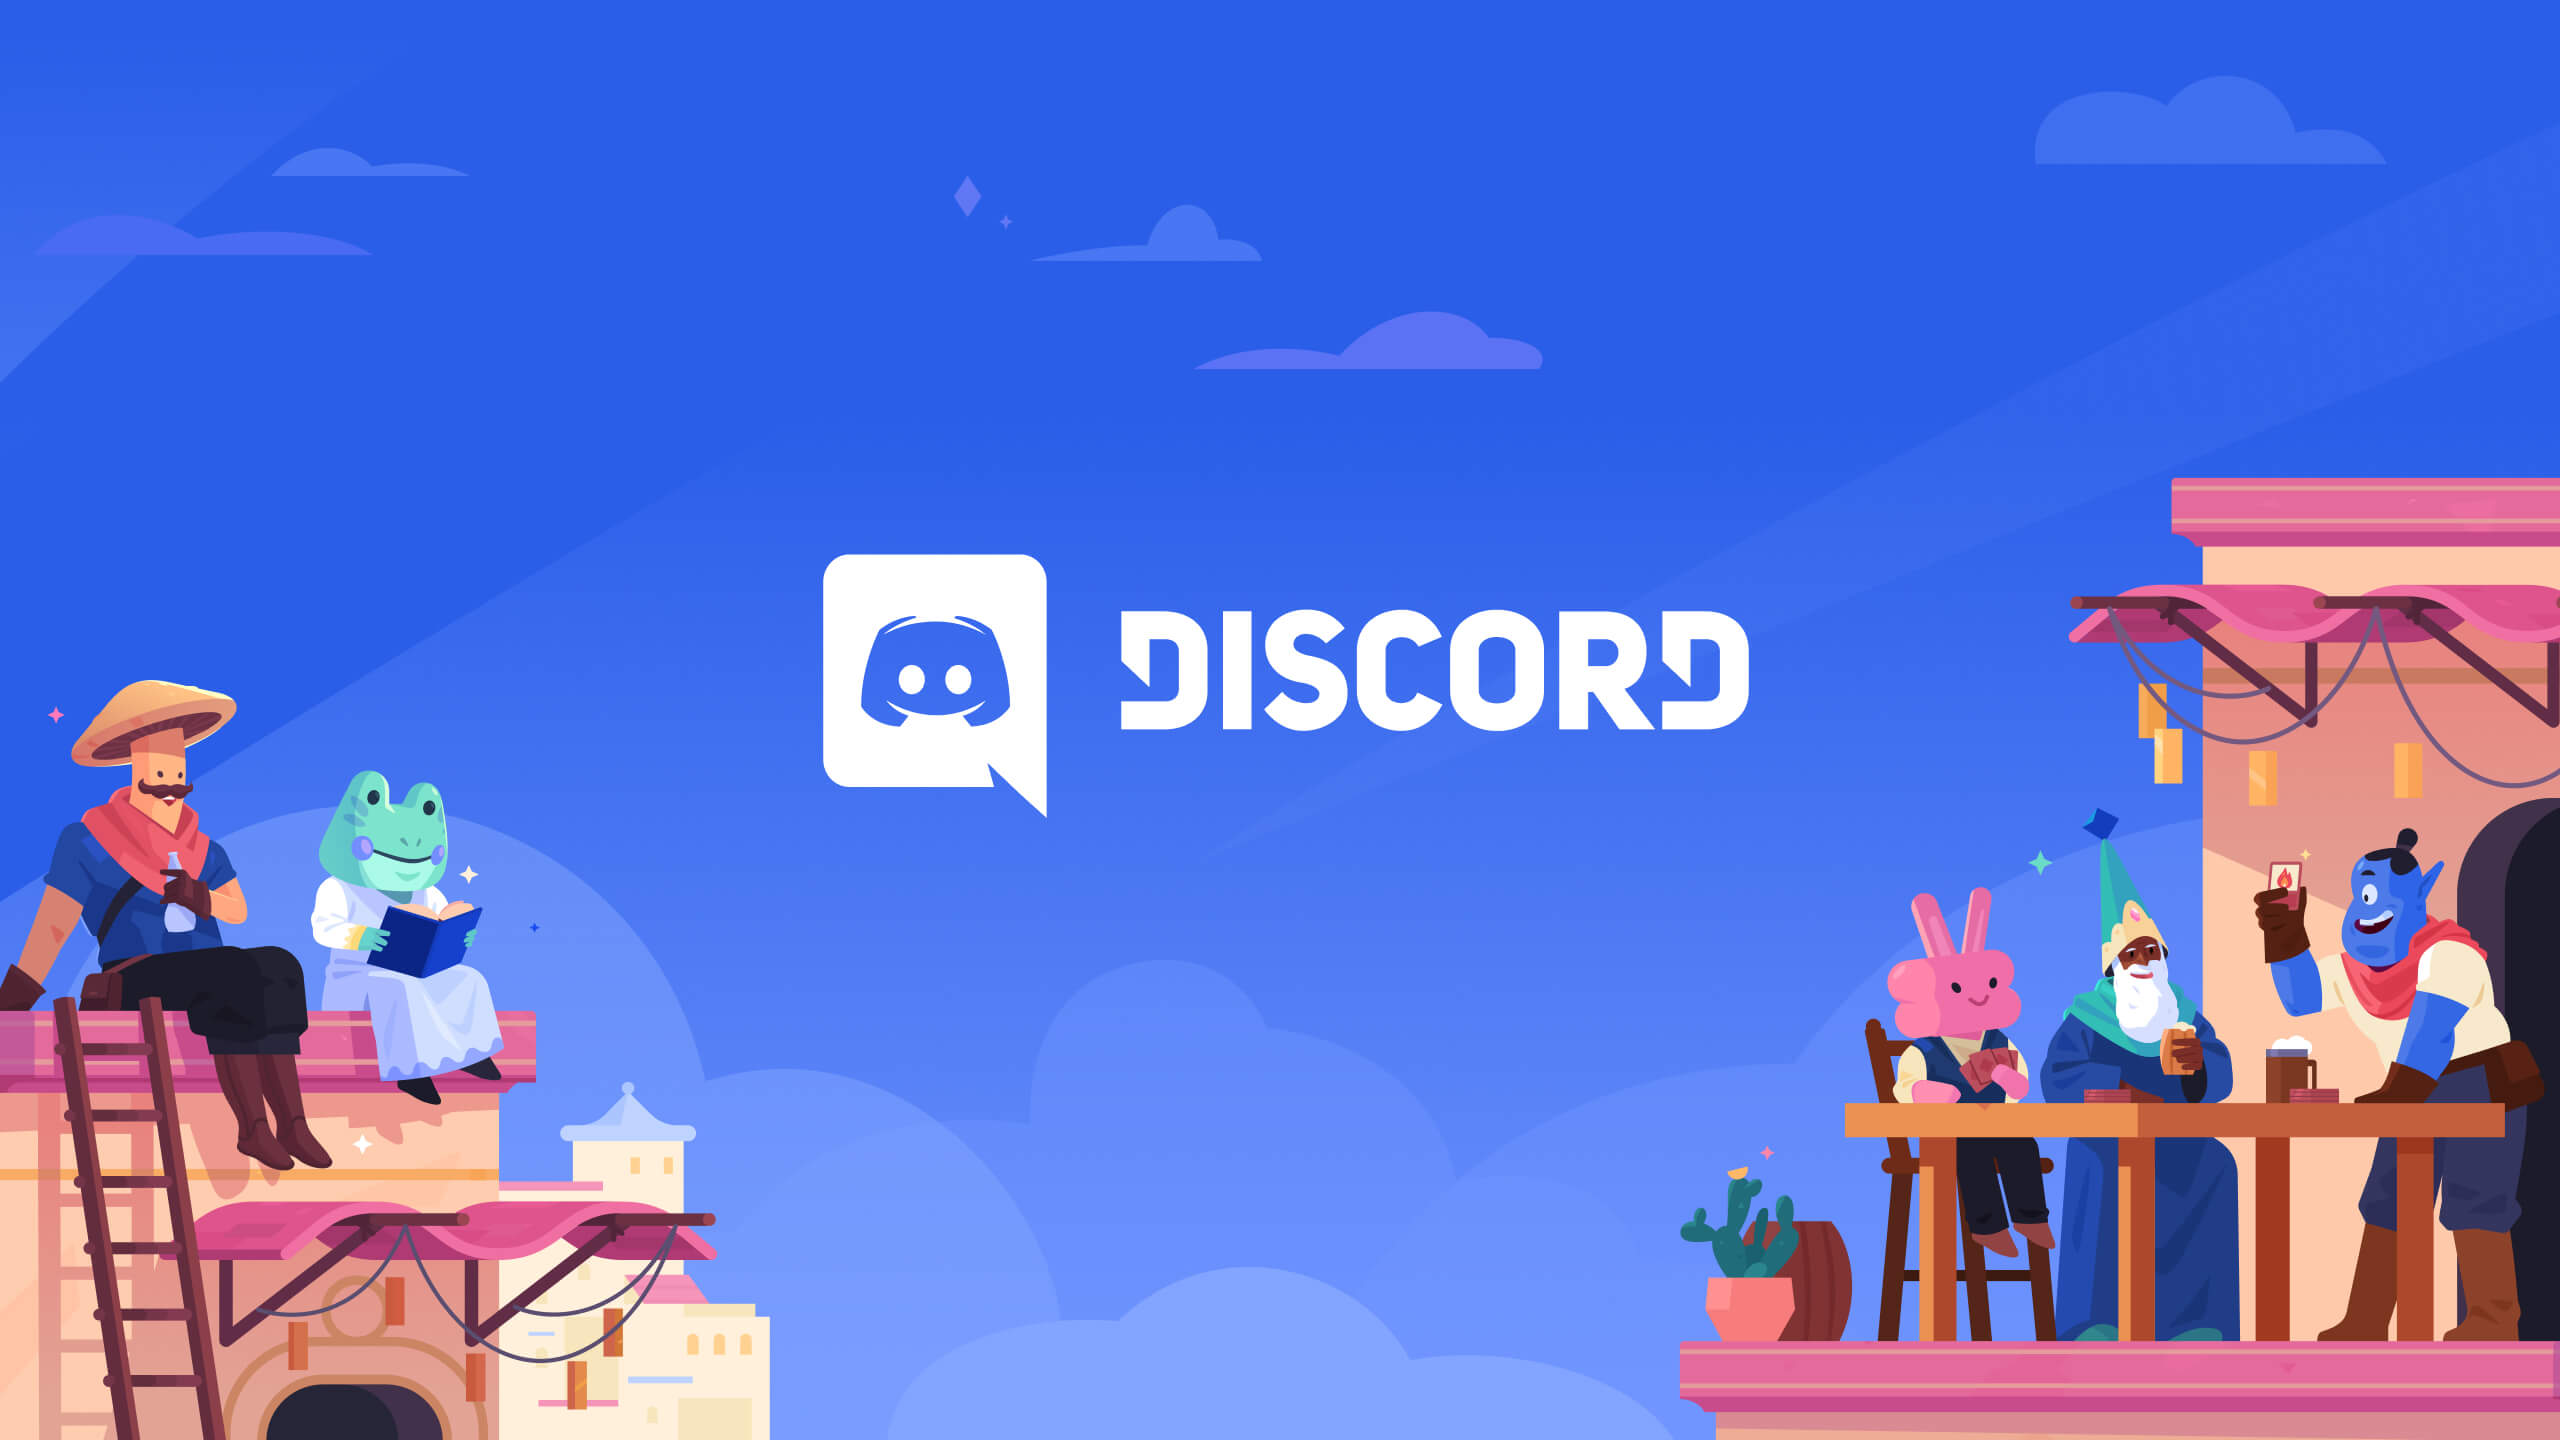 Discord will have changes!  Check out the new username scheme